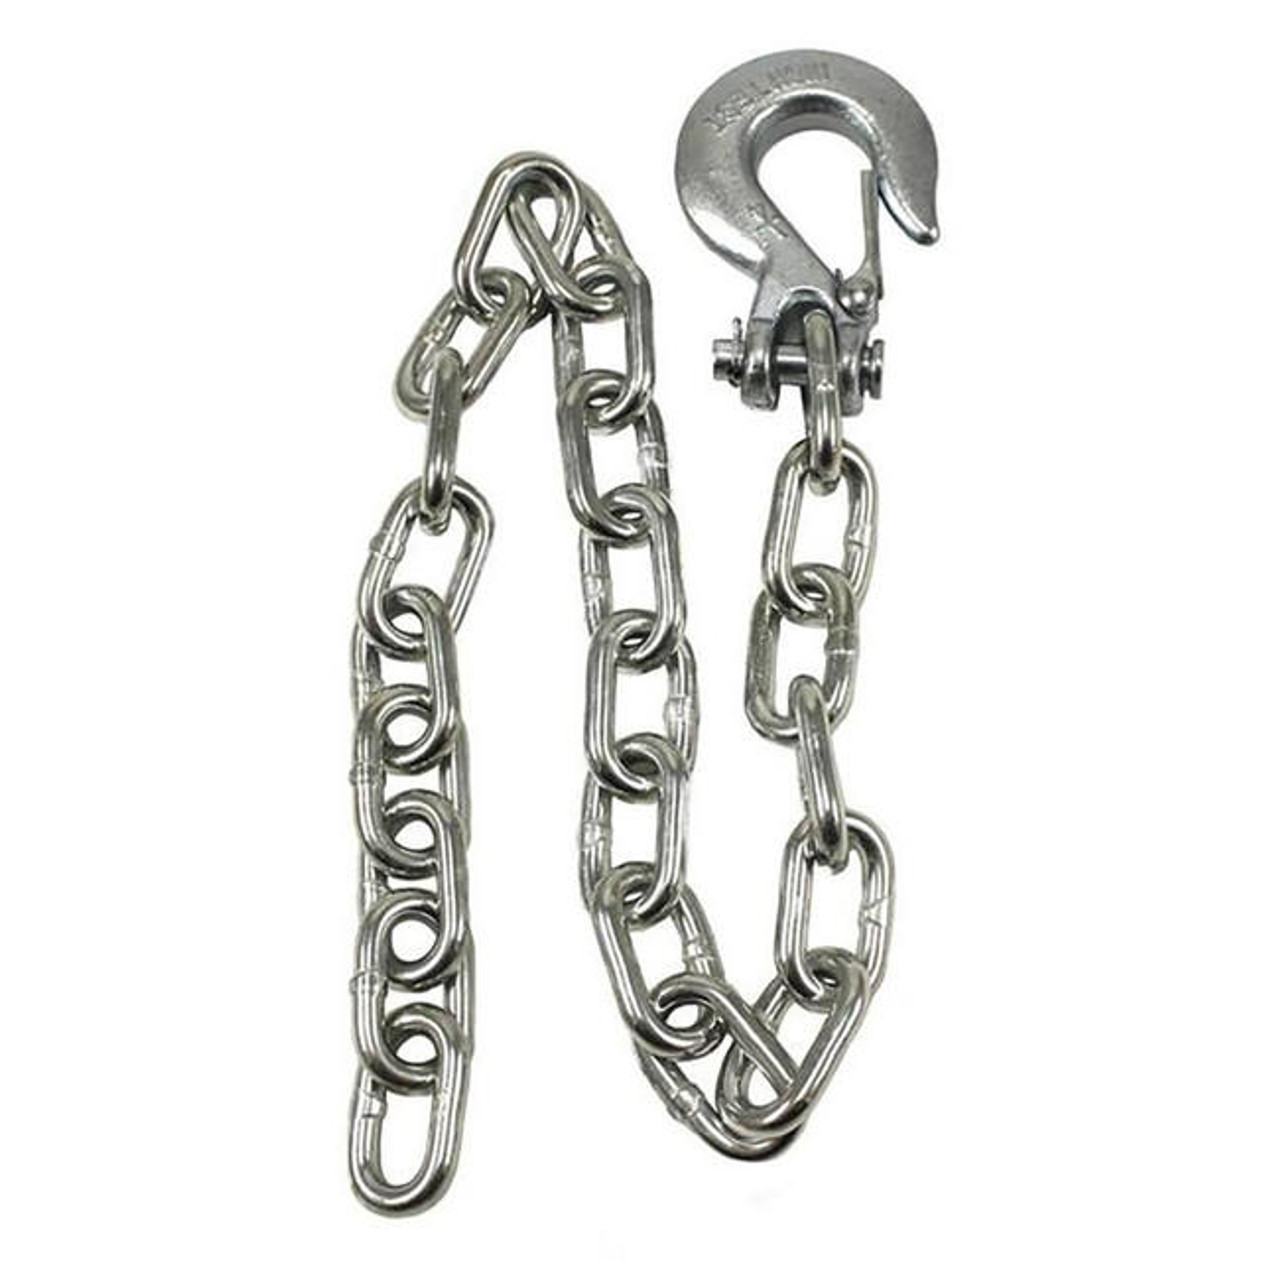 Safety Chains Trailer RV Truck hitch Set 1/4 Grade 70 Chain 37 Long 7,800  Lbs